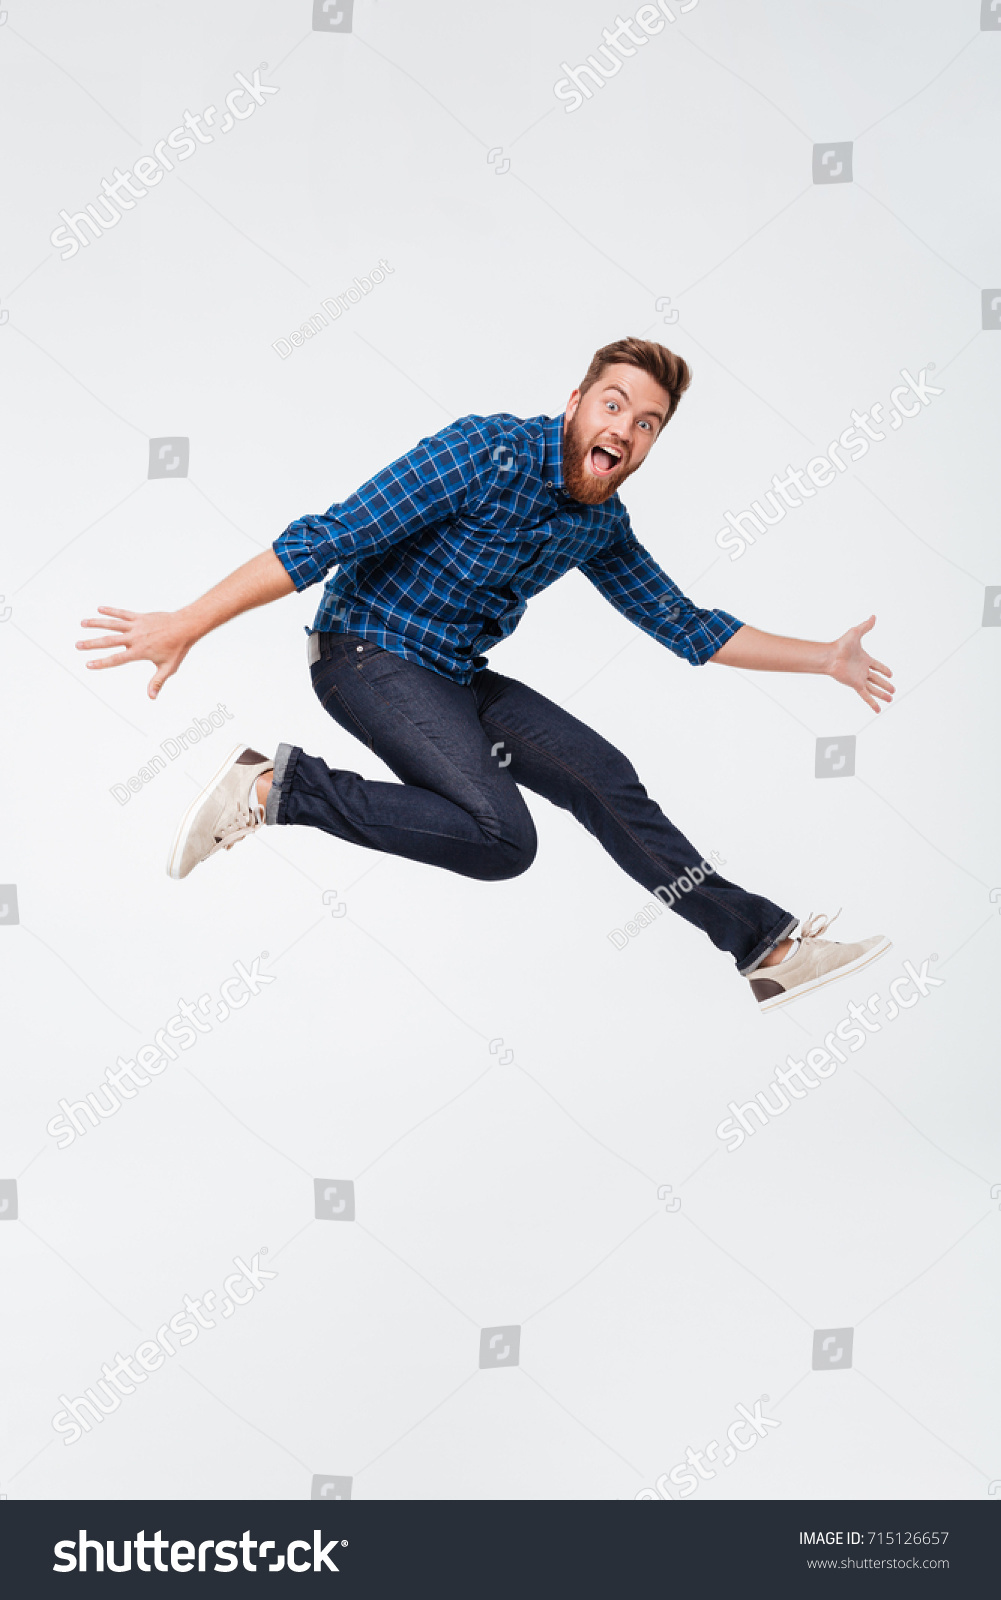 Full length portrait of a happy excited bearded man jumping and looking at camera isolated over white background #715126657